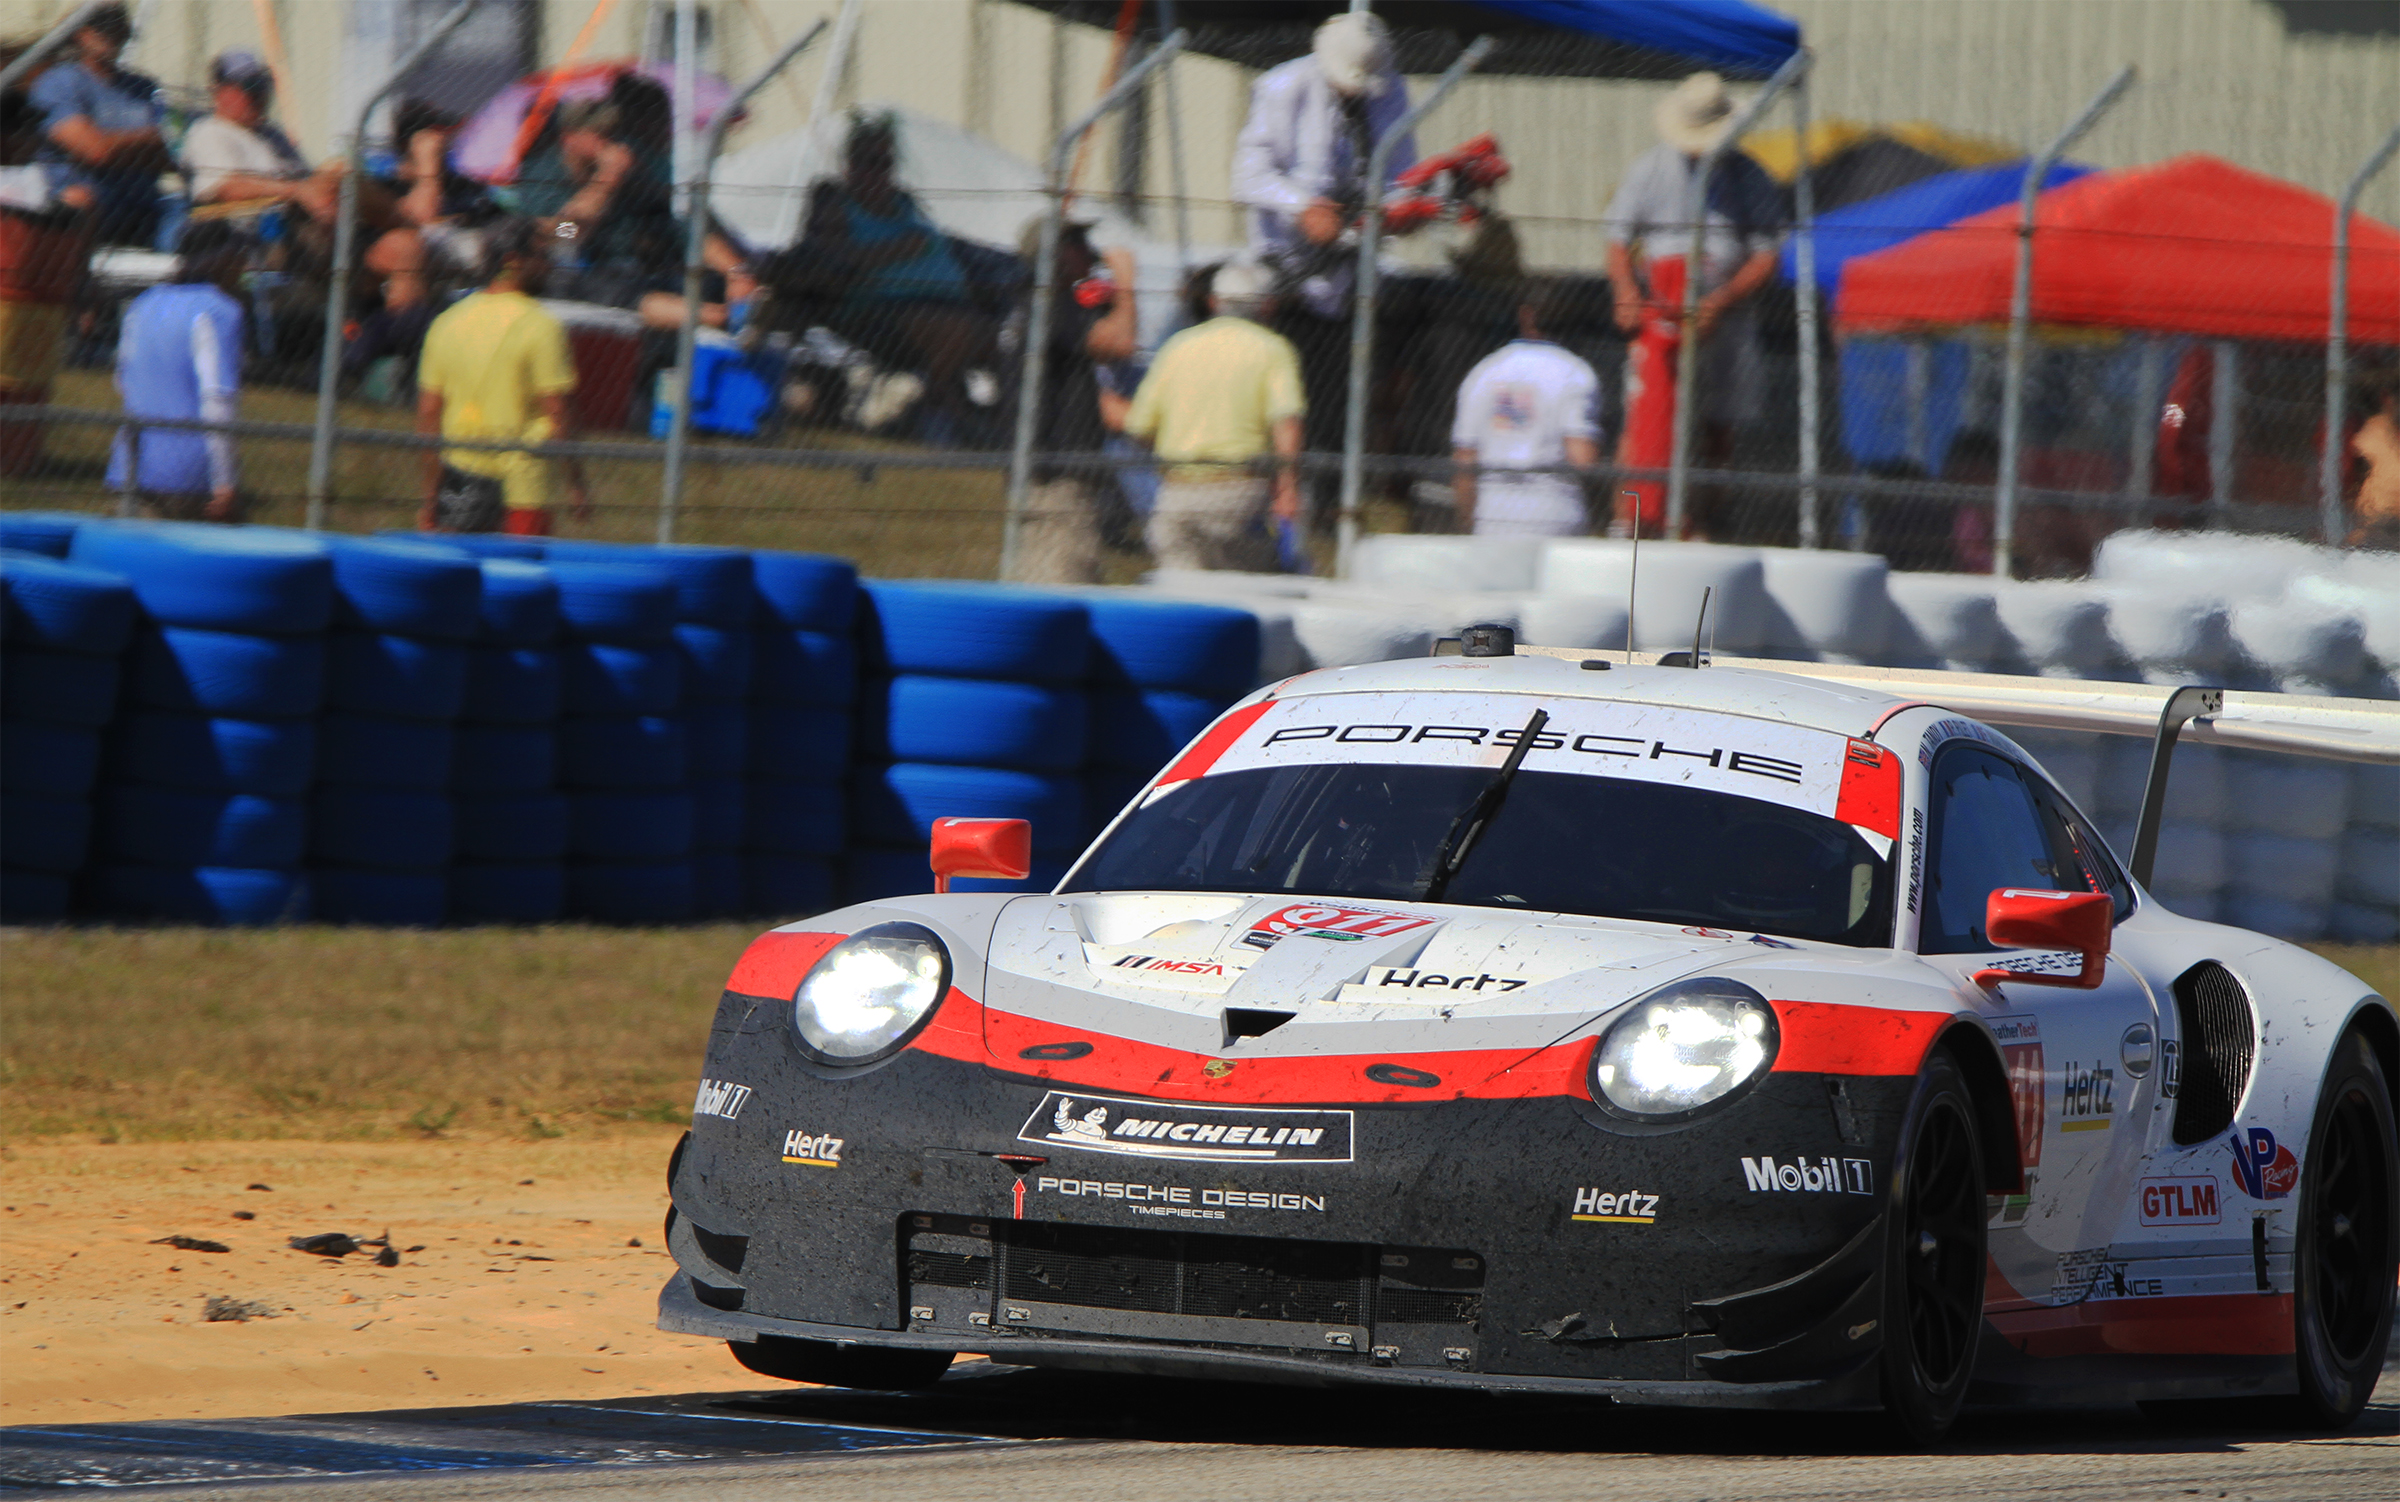 The driver of the #911 Porsche bounces a wheel into the air exiting Turn Five. (Chris Jasurek/Epoch Times)